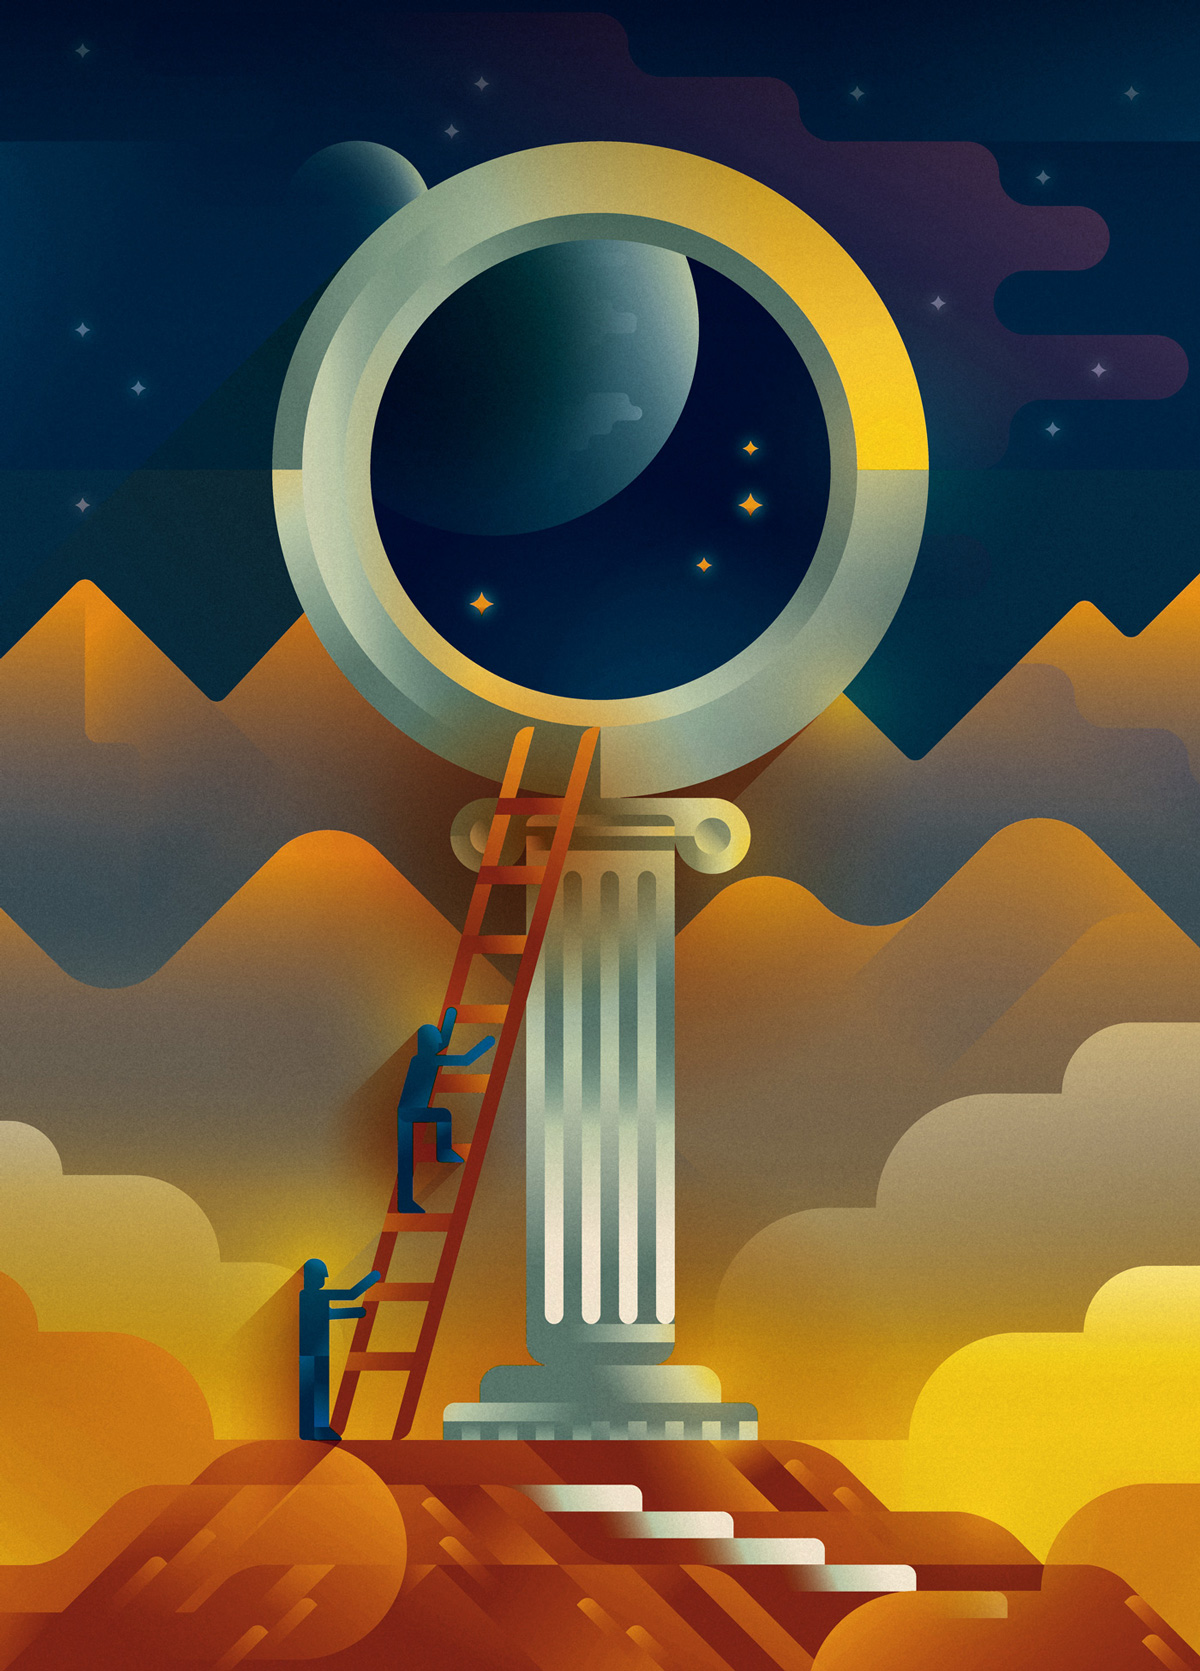 A couple of men climbing a wooden staircase on a big magnifying glass similar to a Greek temple to see the stars in the night sky, illustration by Francesco Faggiano illustrator